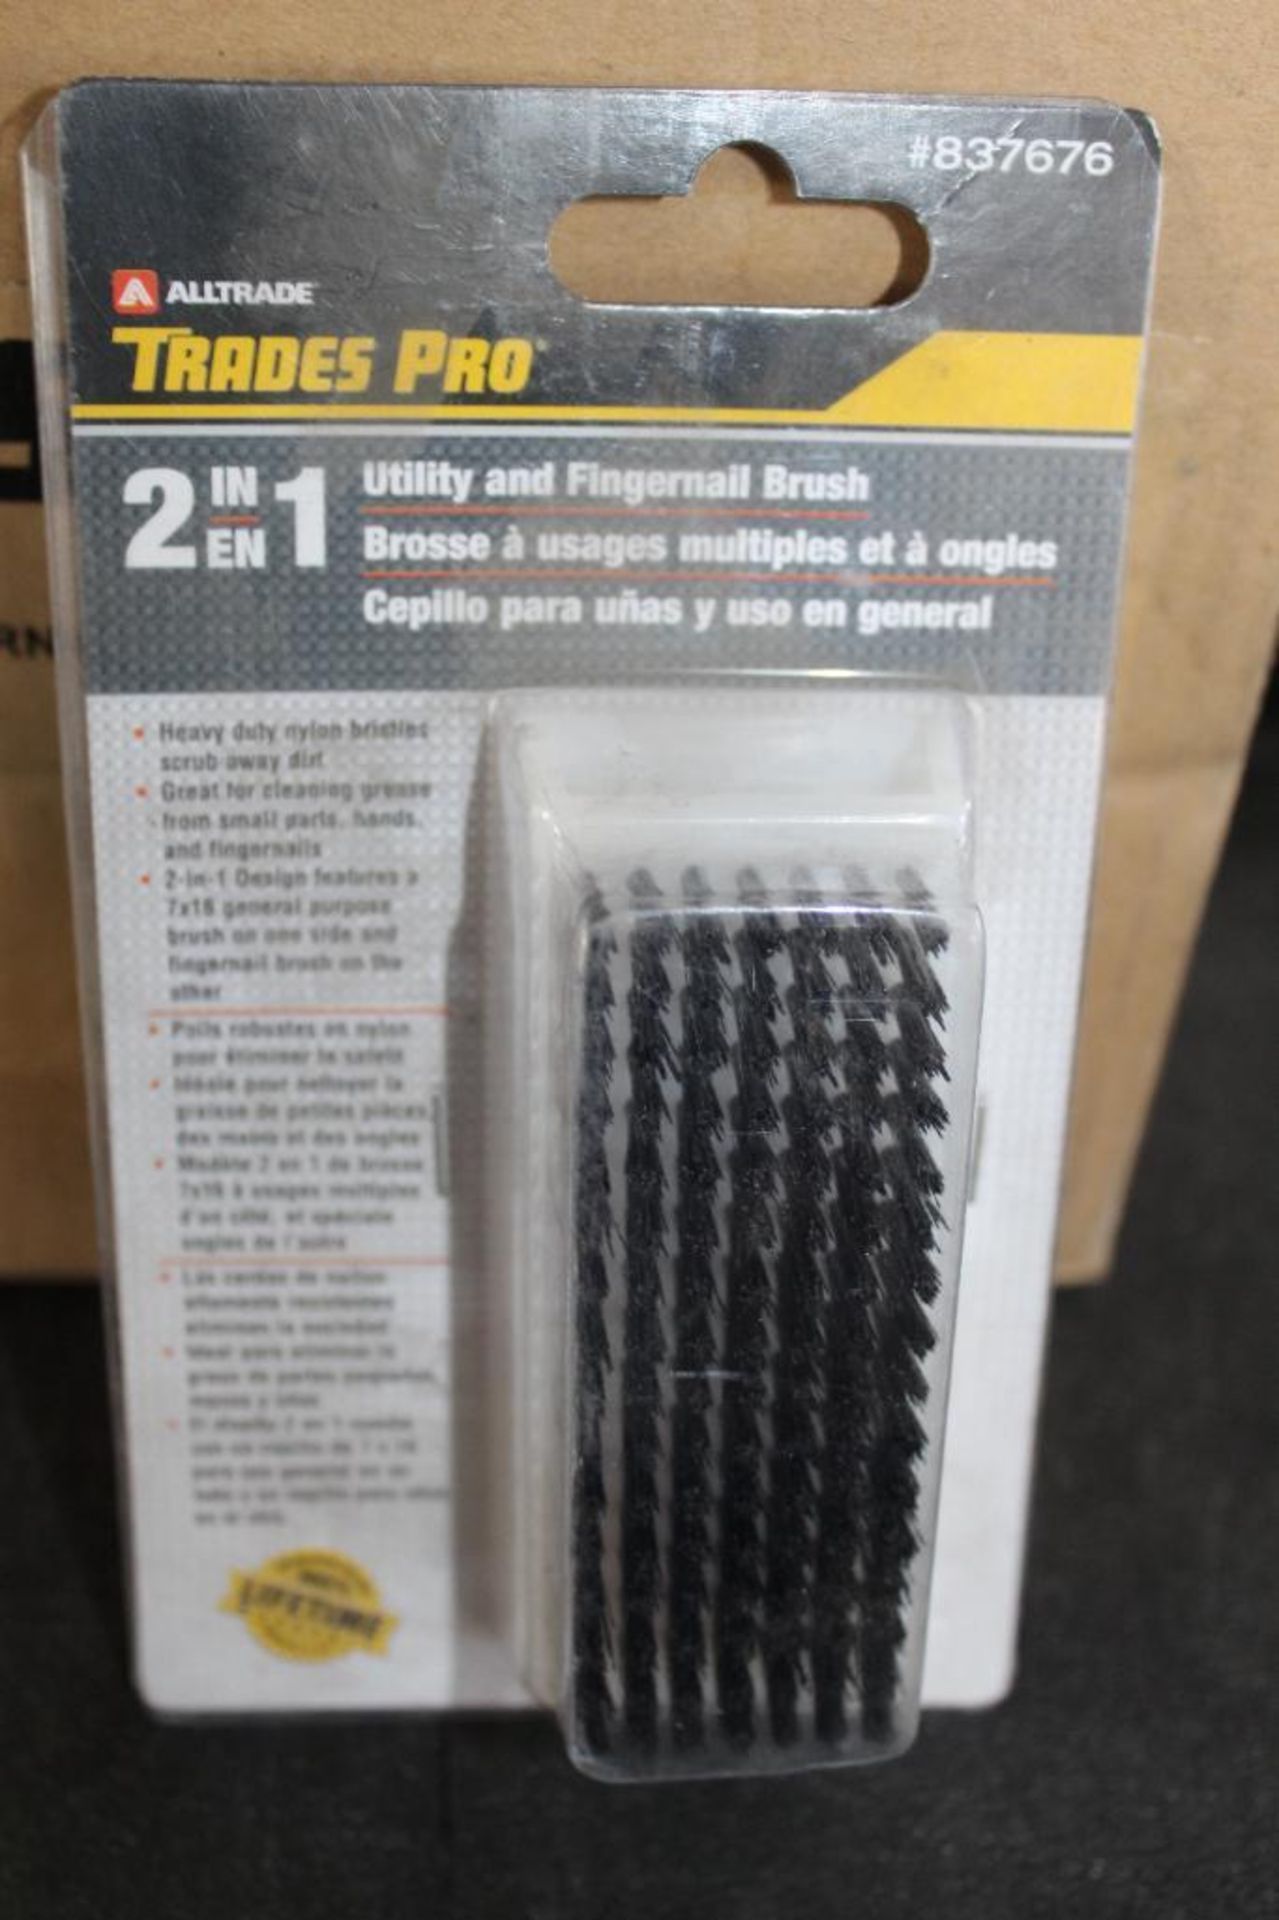 Box of (15) Trades Pro 2-In-1 Utility and Fingernail Brush Model No. 837676